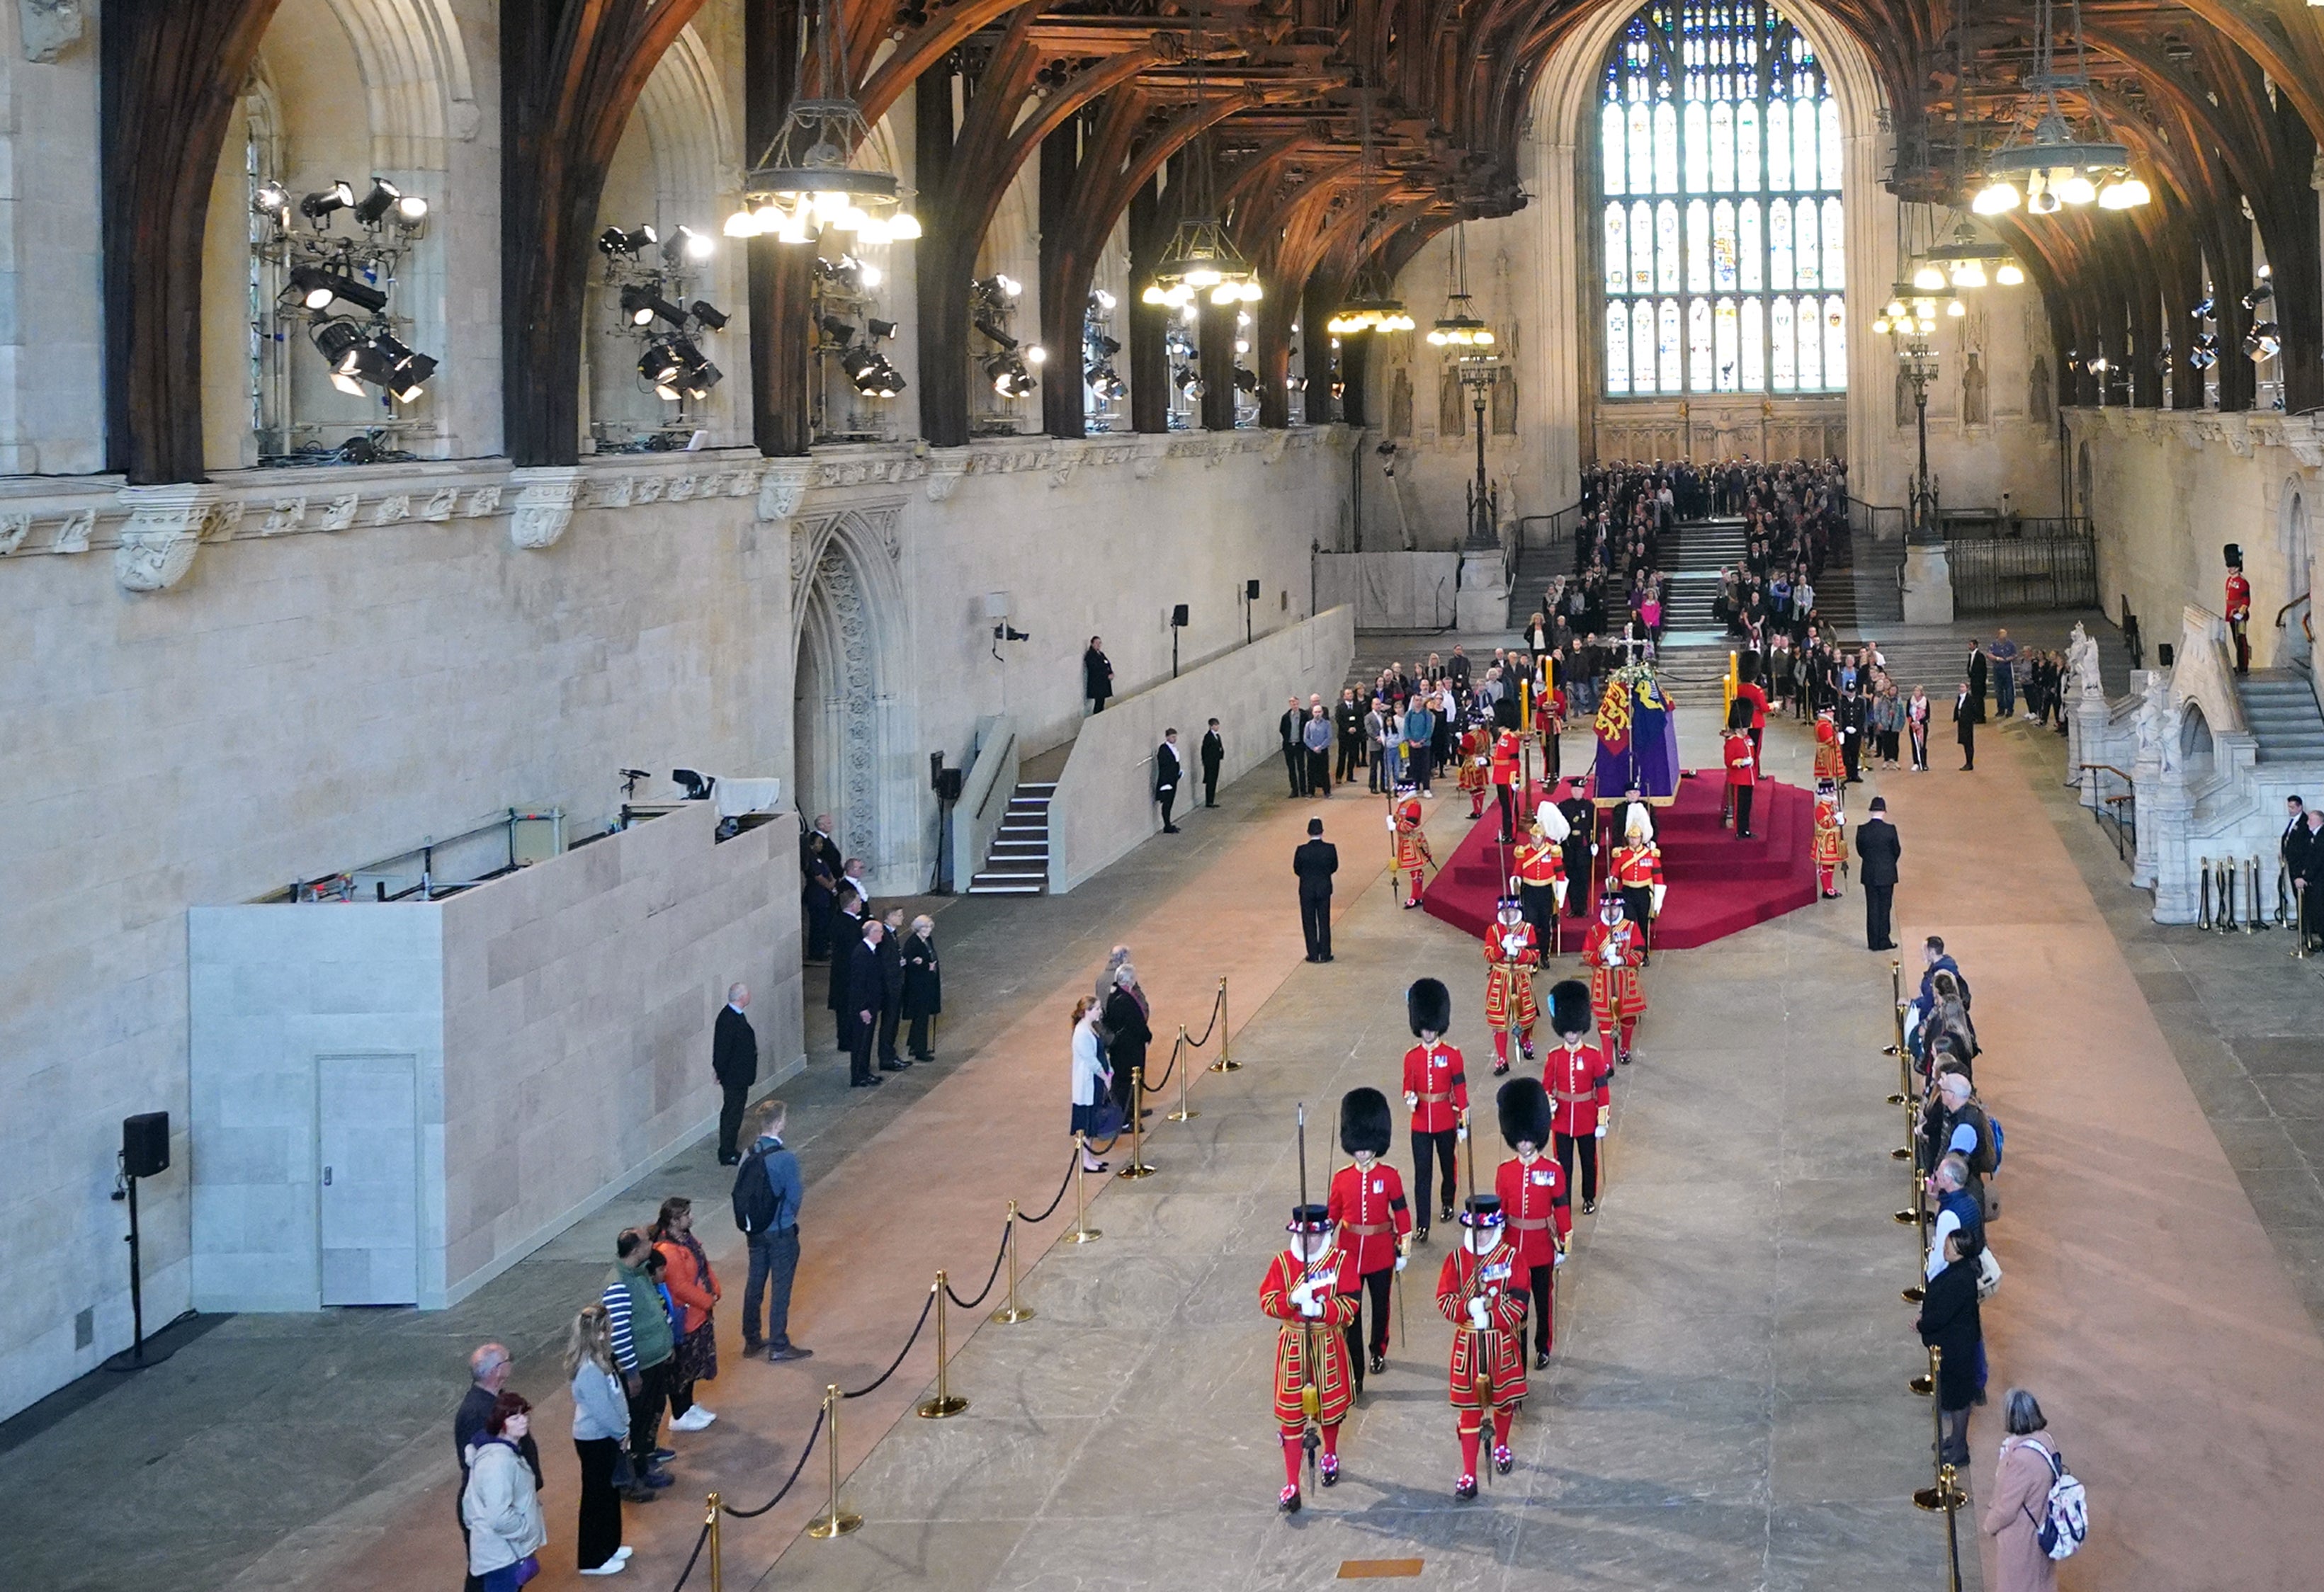 The old guard leaves after standing vigil around the Queen’s coffin in Westminster Hall during her lying in state (Yui Mok/PA)